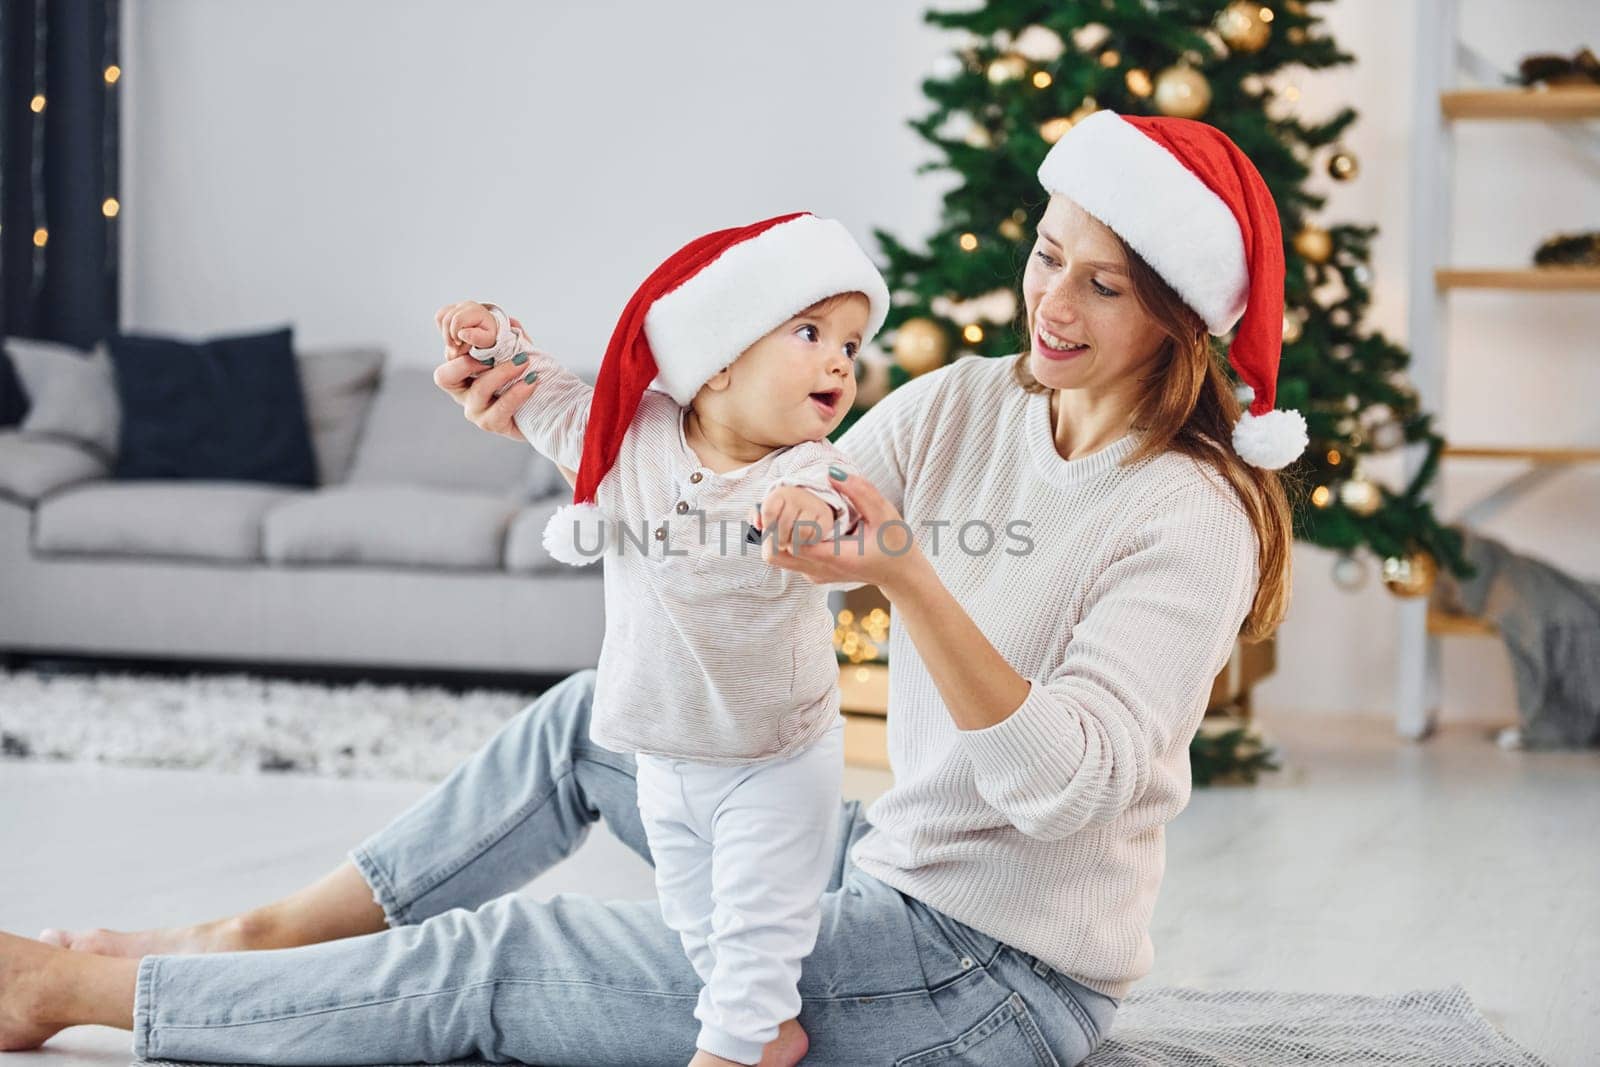 Celebrating Christmas. Mother with her little daughter is indoors at home together.